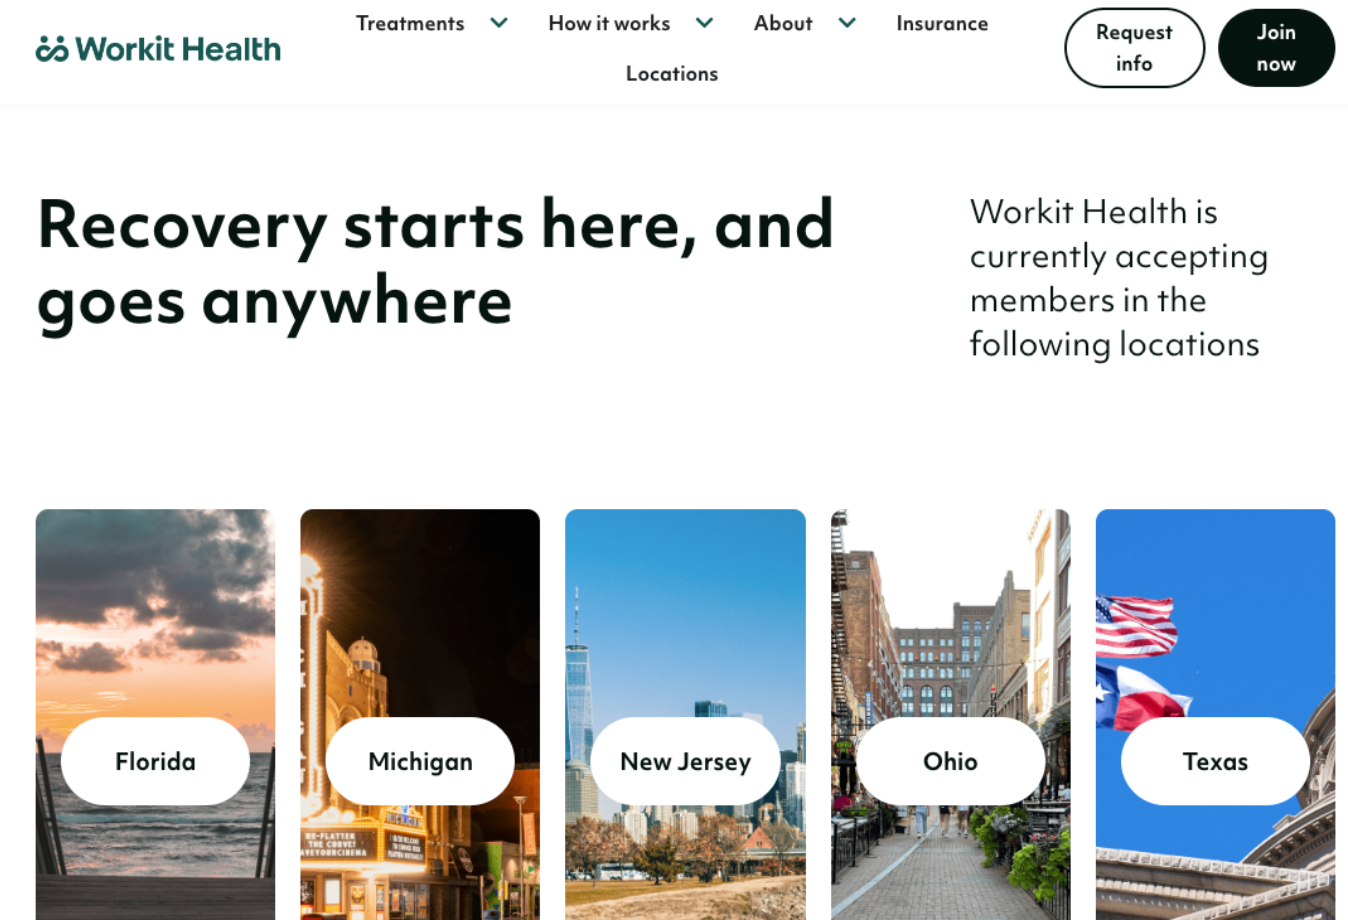 US States where WorkIT health is available